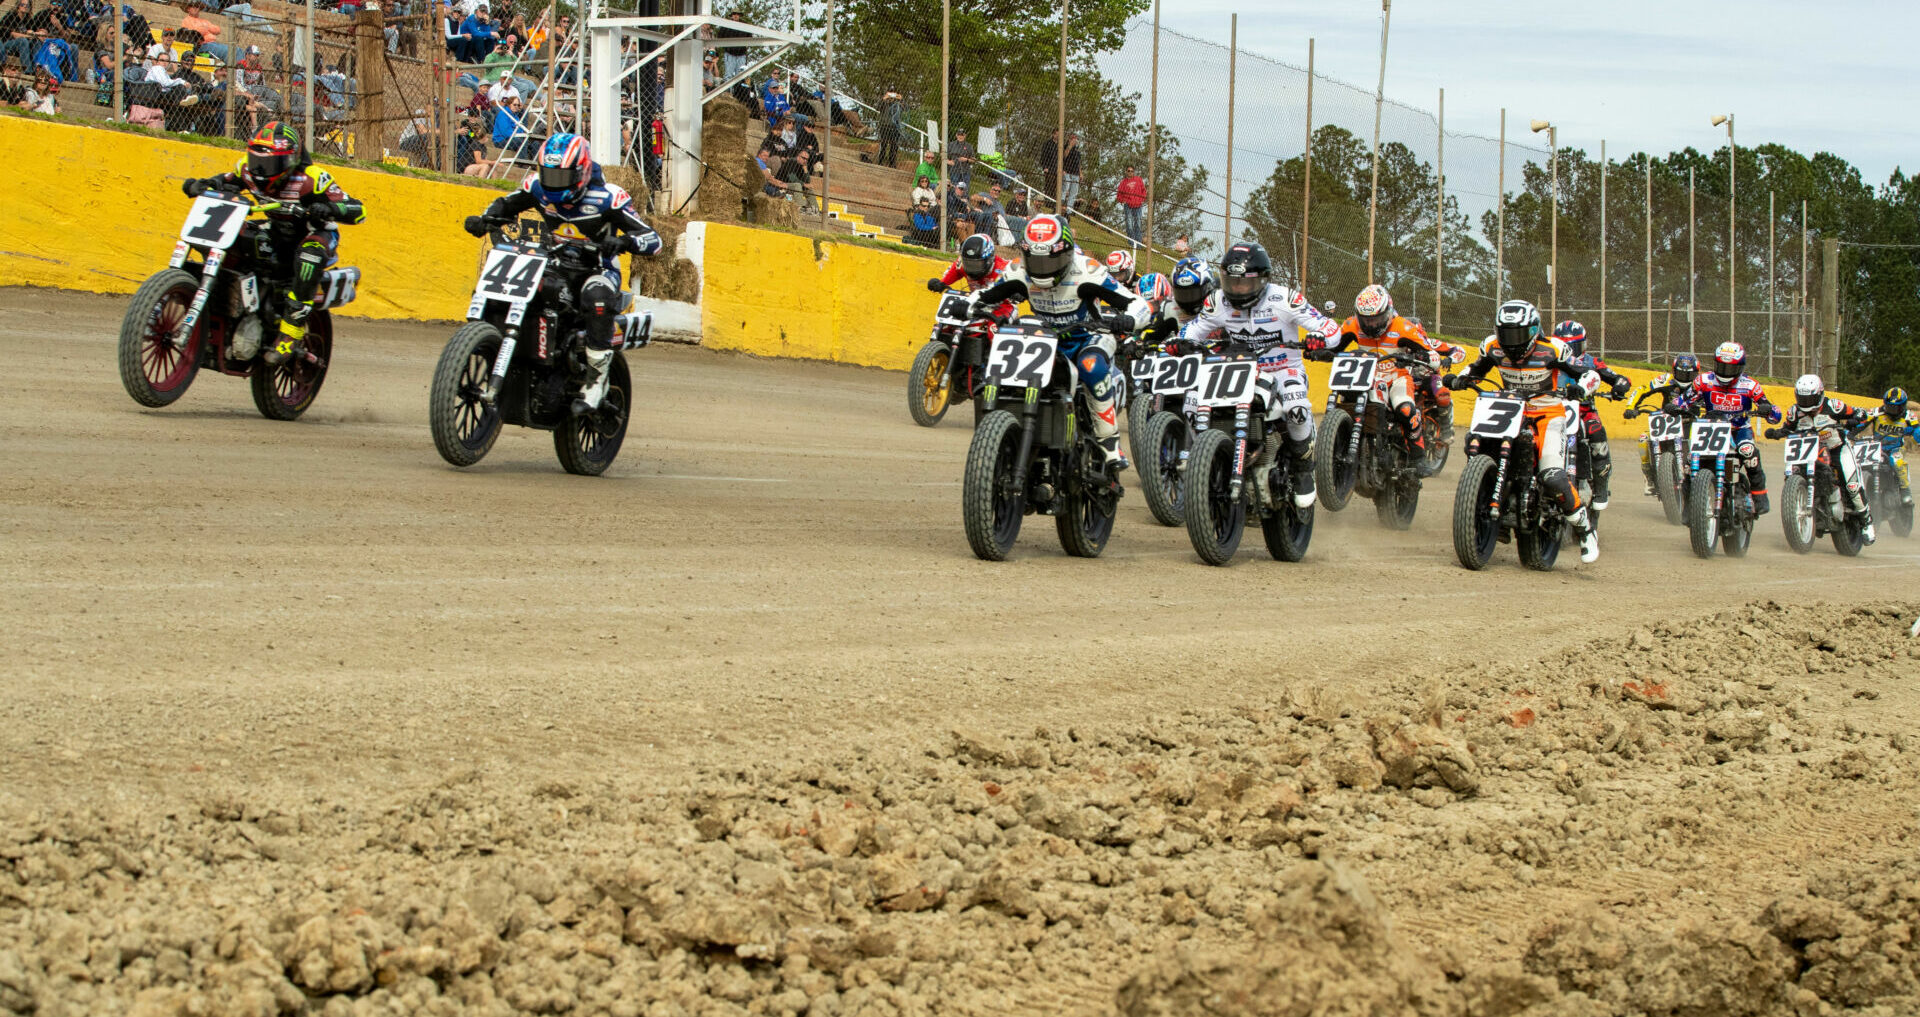 Jared Mees (1), Brandon Robinson (44), Dallas Daniels (32), and Johnny Lewis (10) lead the start of the AFT Mission SuperTwins main event at the Senoia Short Track. Photo by Tim Lester, courtesy AFT.